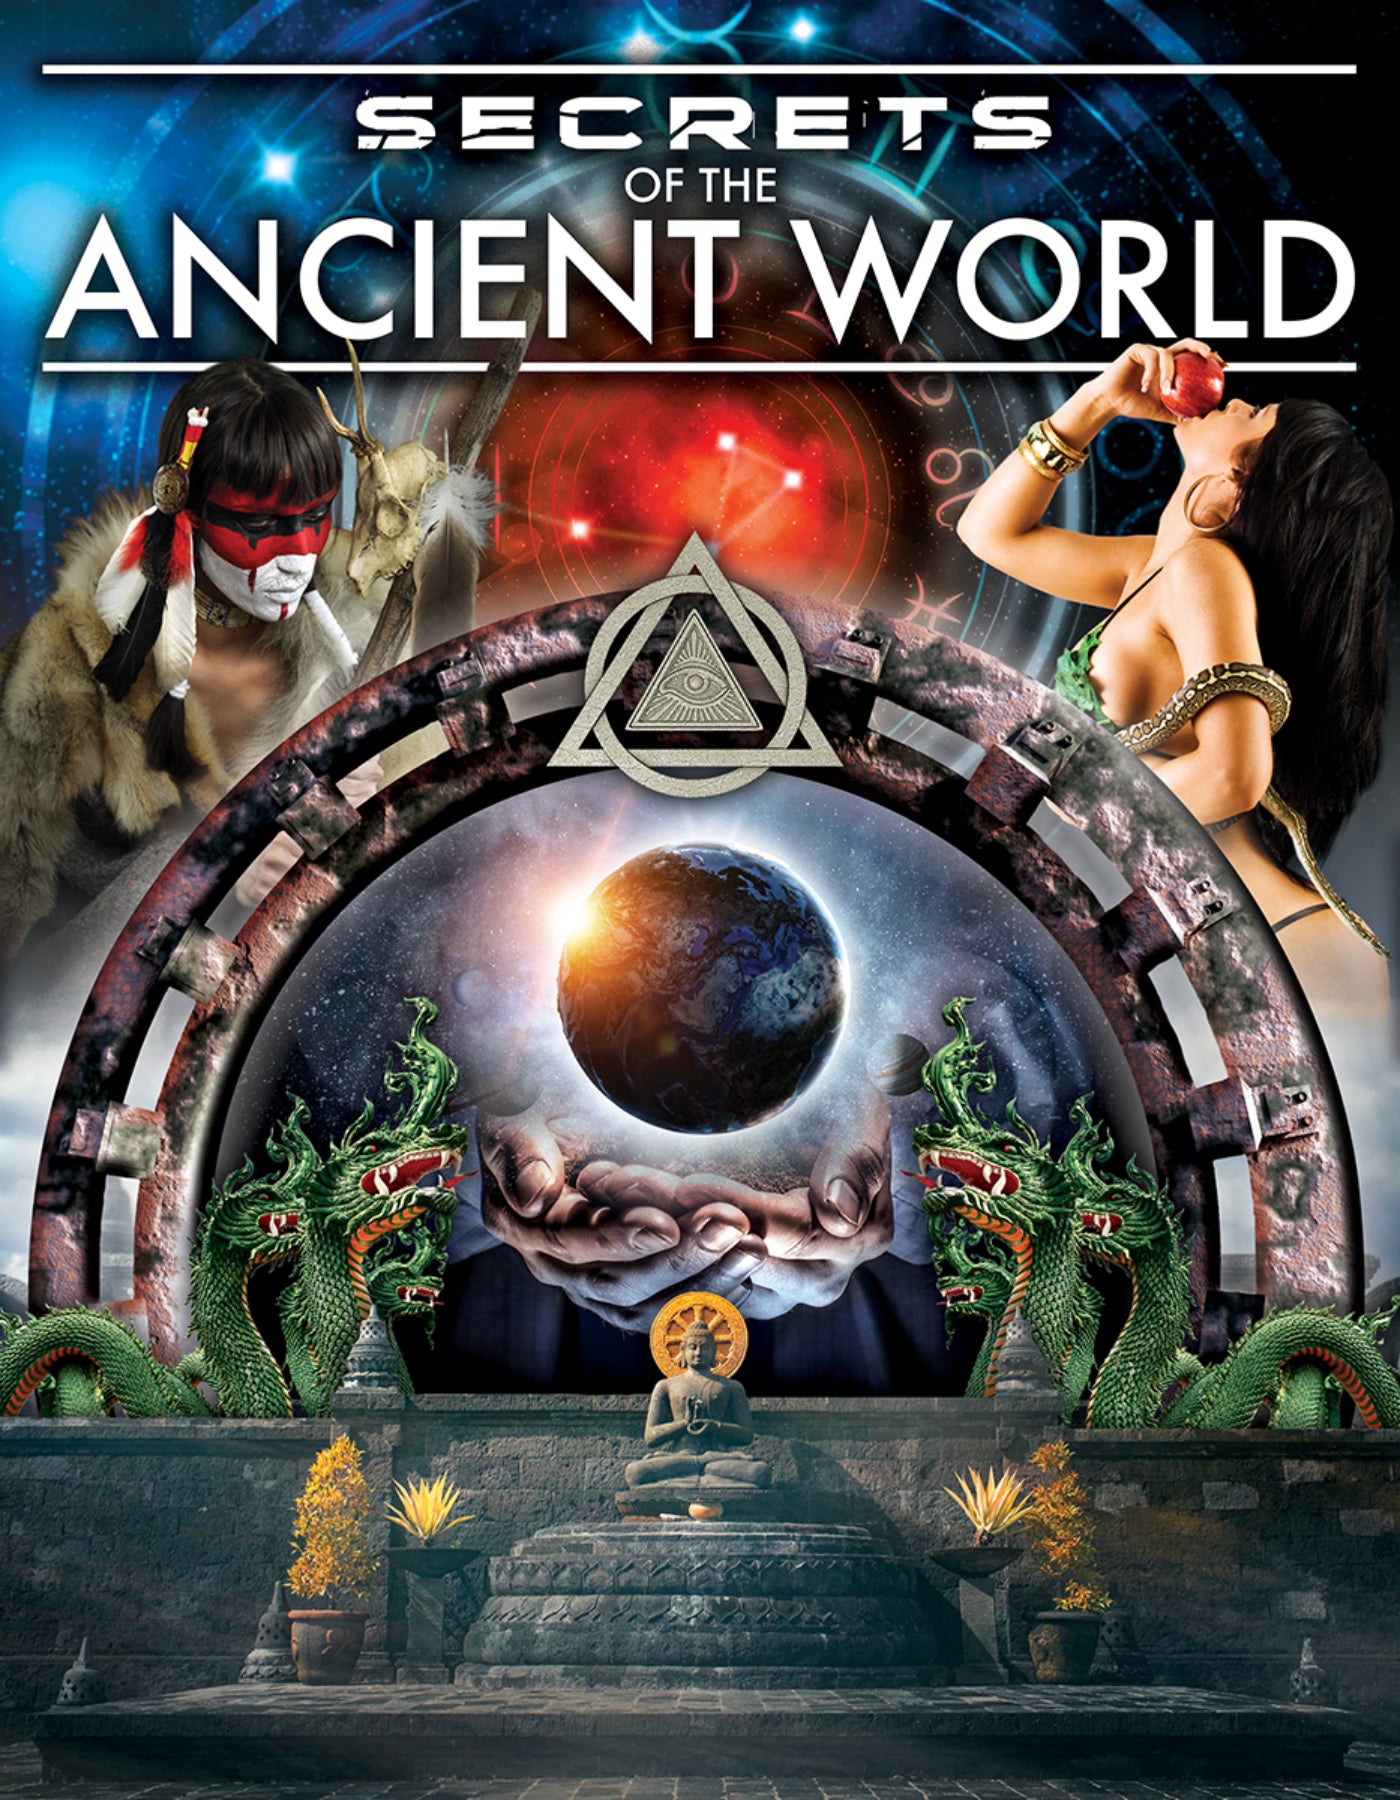 Secrets Of The Ancient World cover art